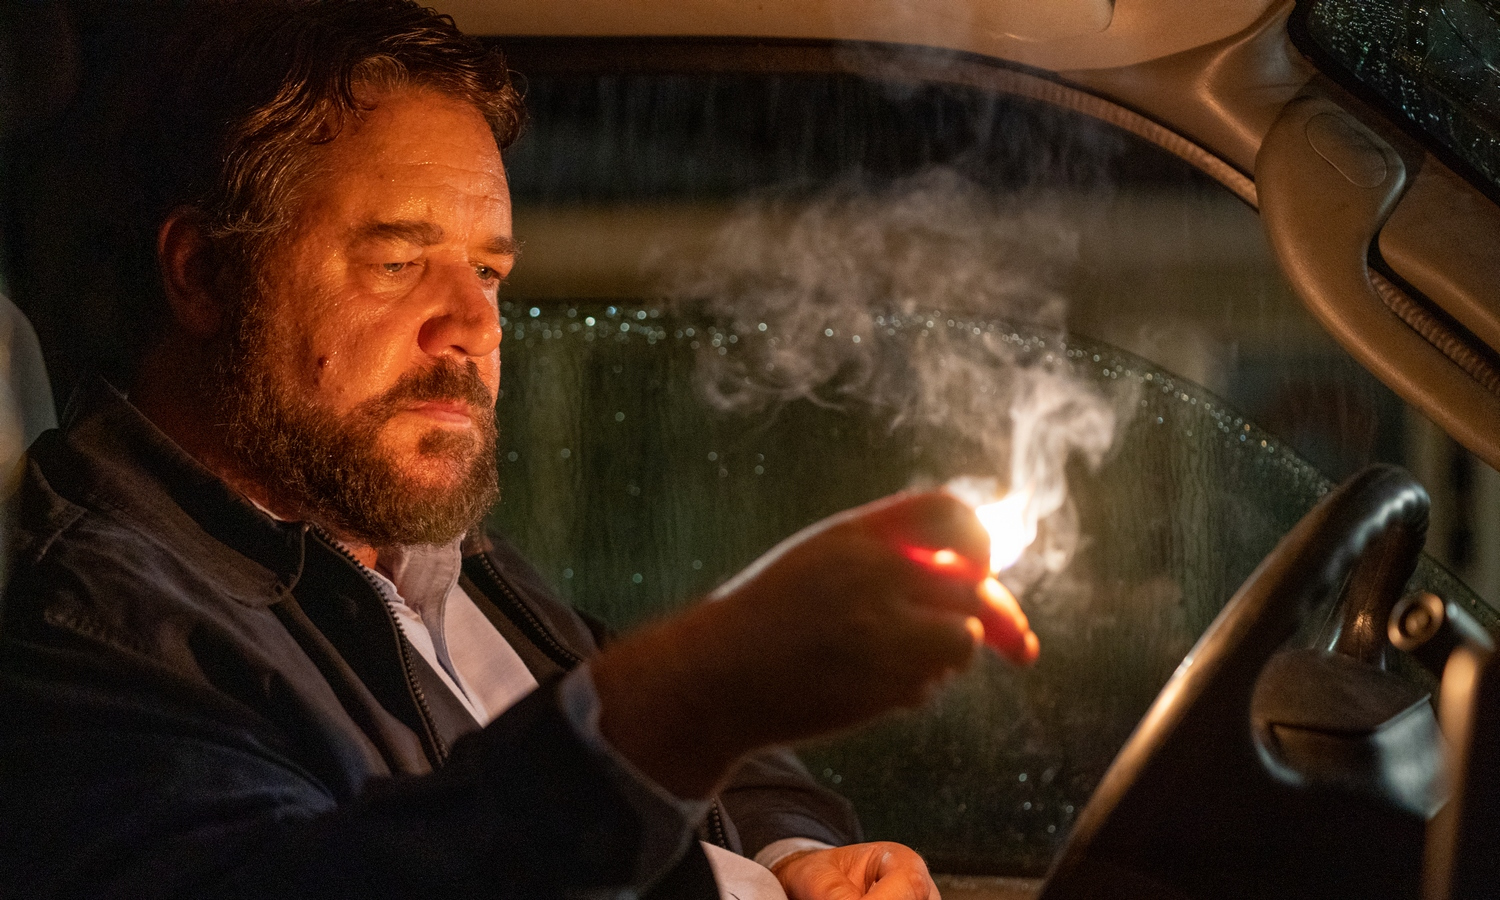 Unhinged Review: Russell Crowe Descends to Slasher Shlock